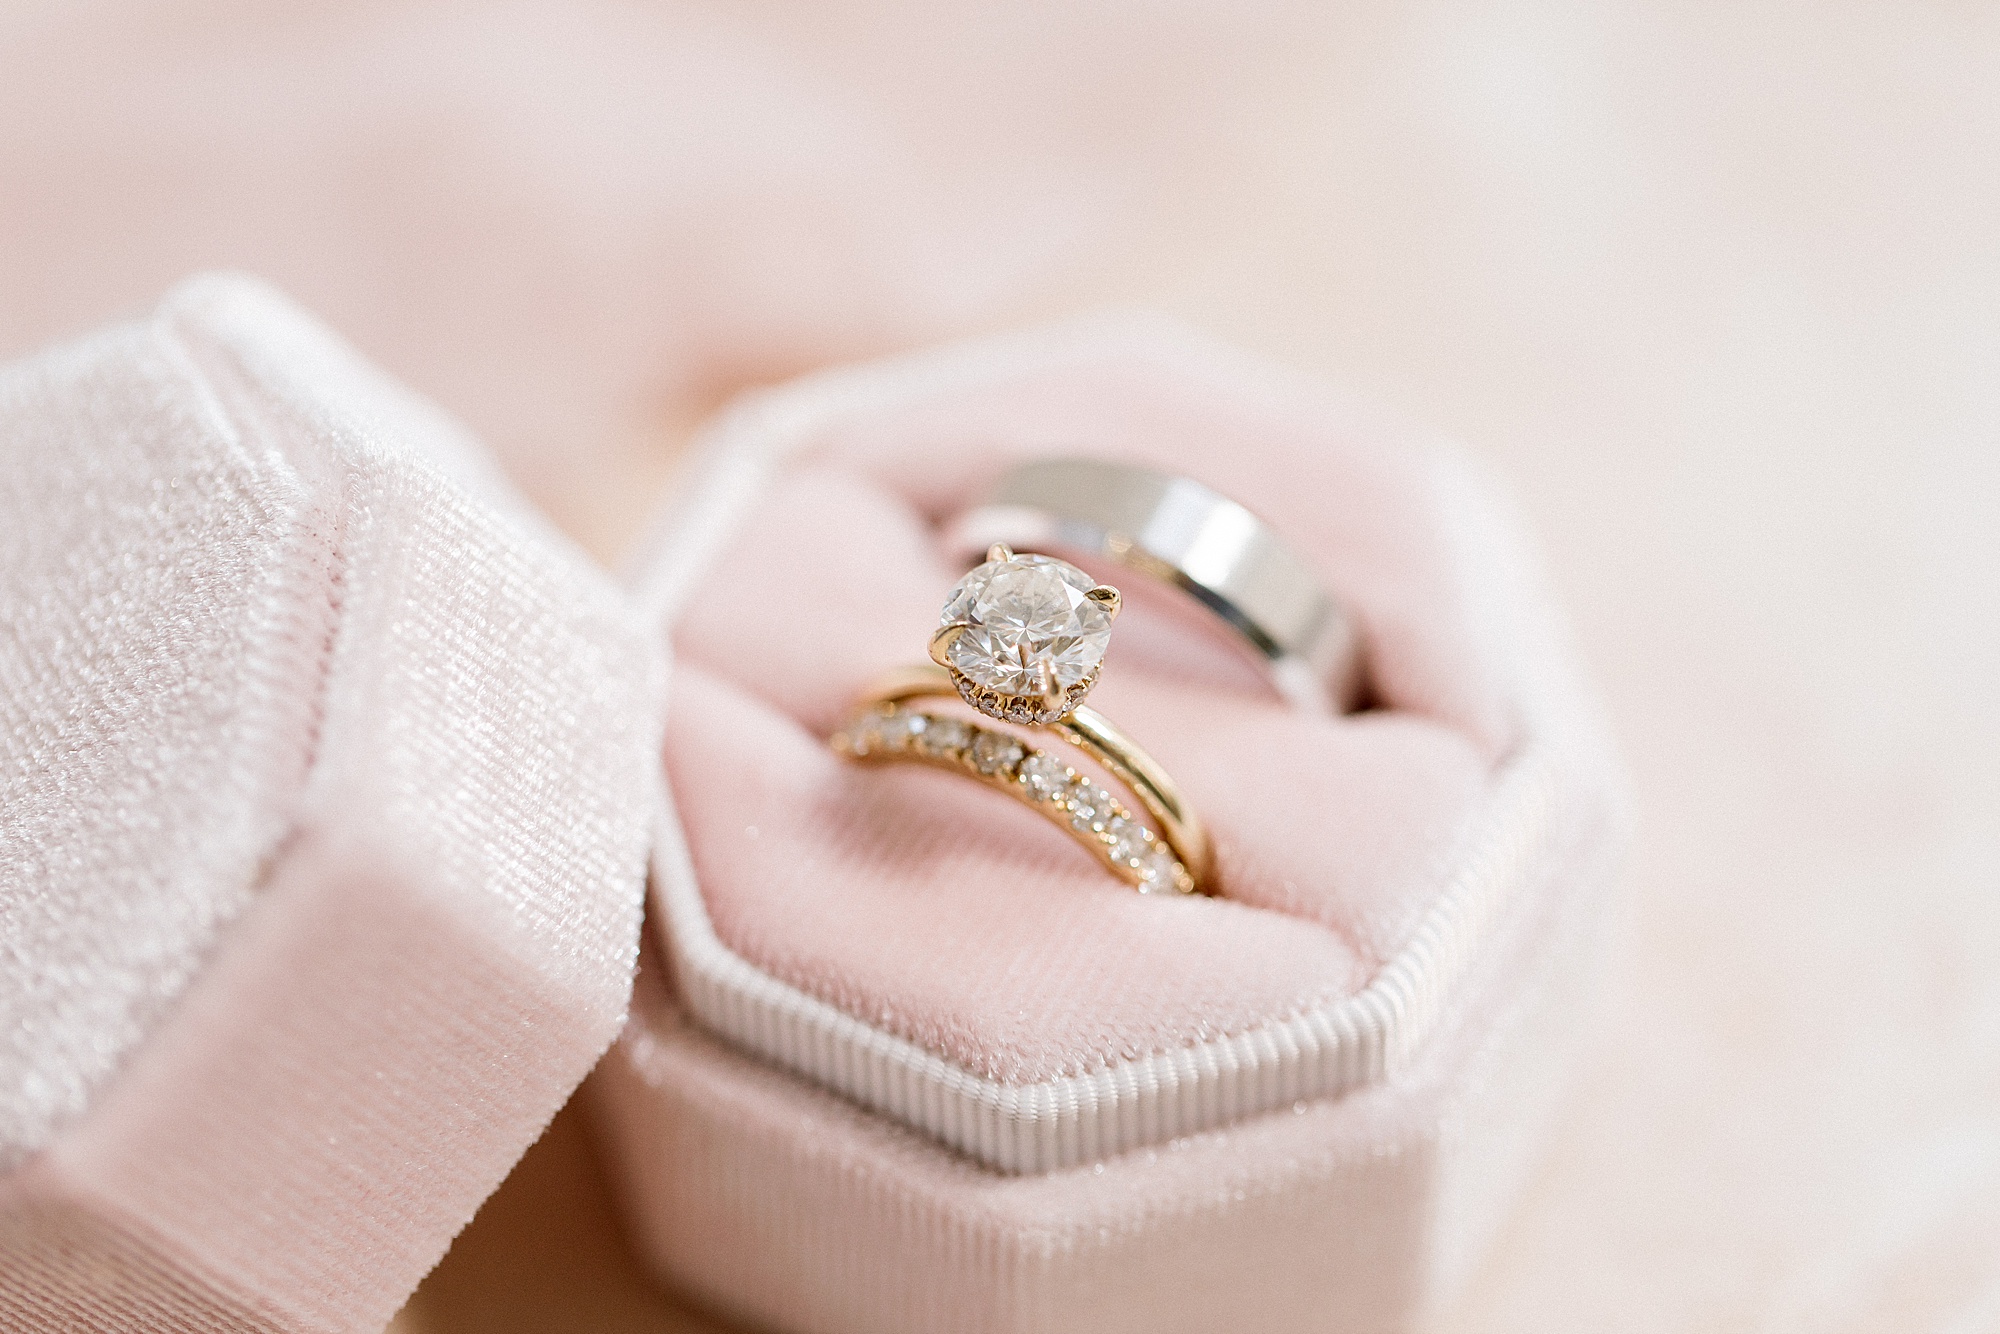 gold wedding rings rest in pink box